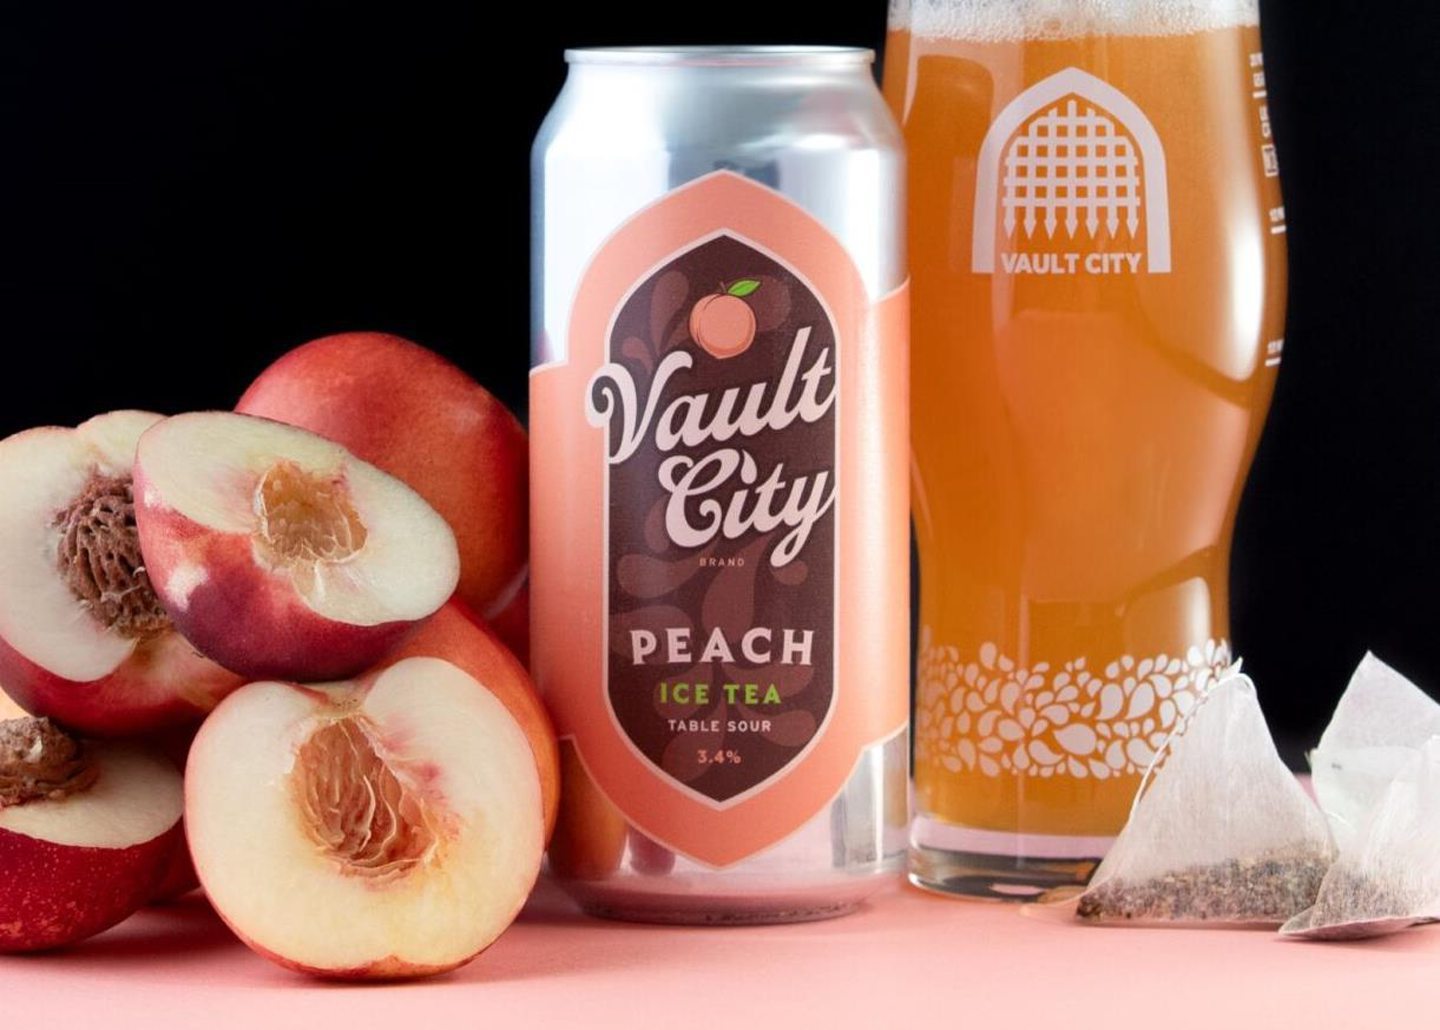 Vault City's Peach Ice Tea sour table beer, next to some peaches and black tea. 